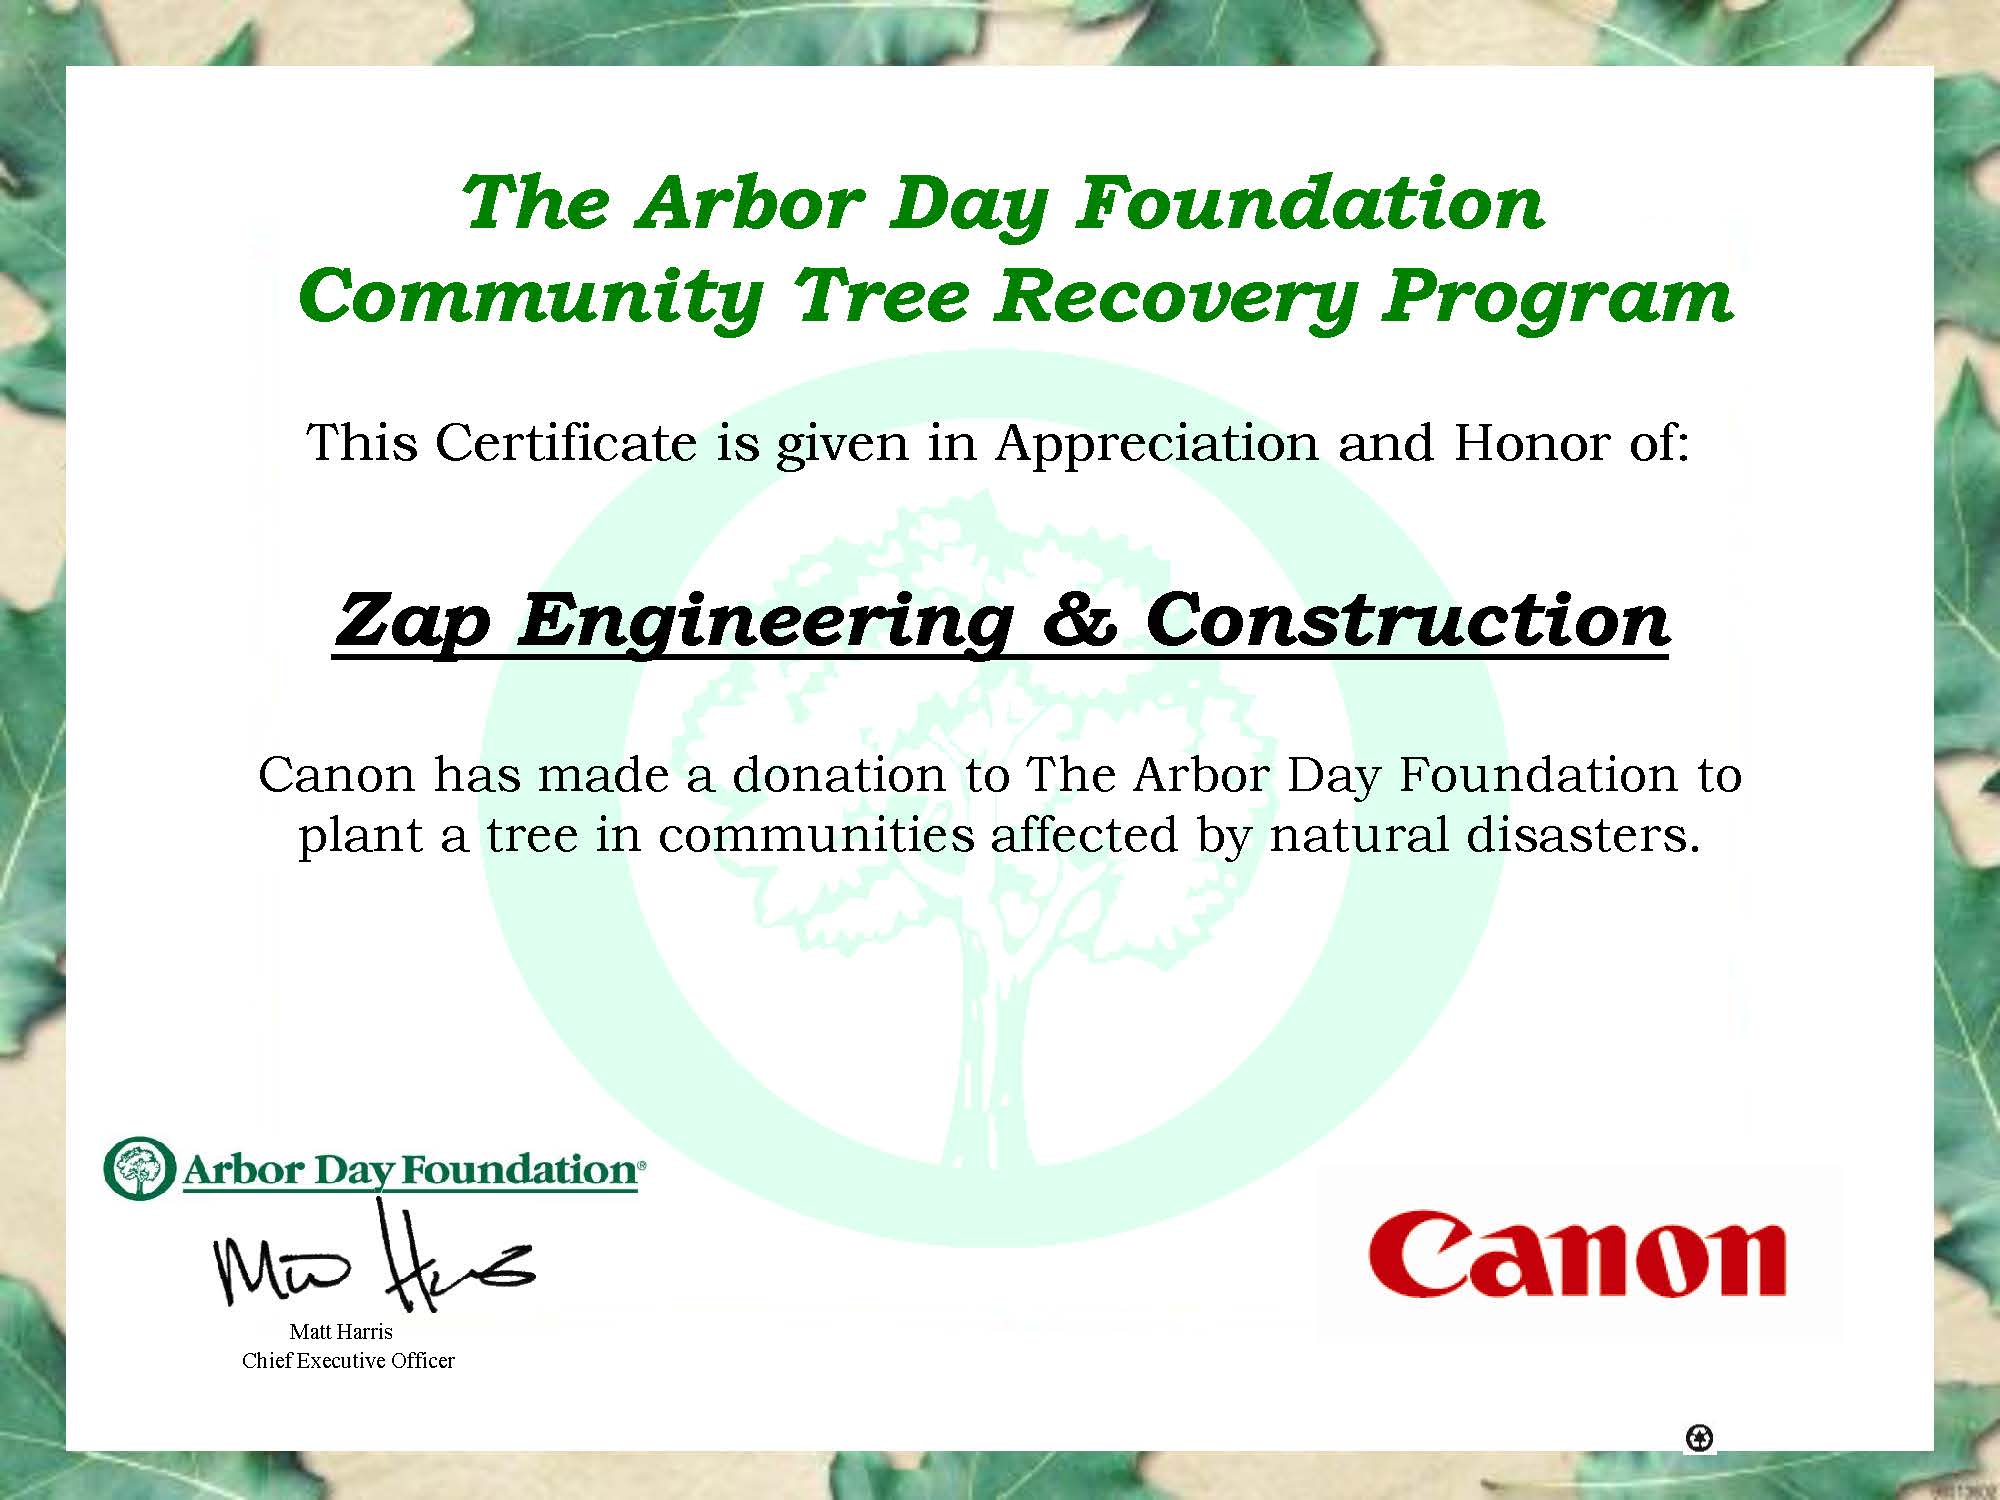 The Arbor Day Foundation ZAP Engineering